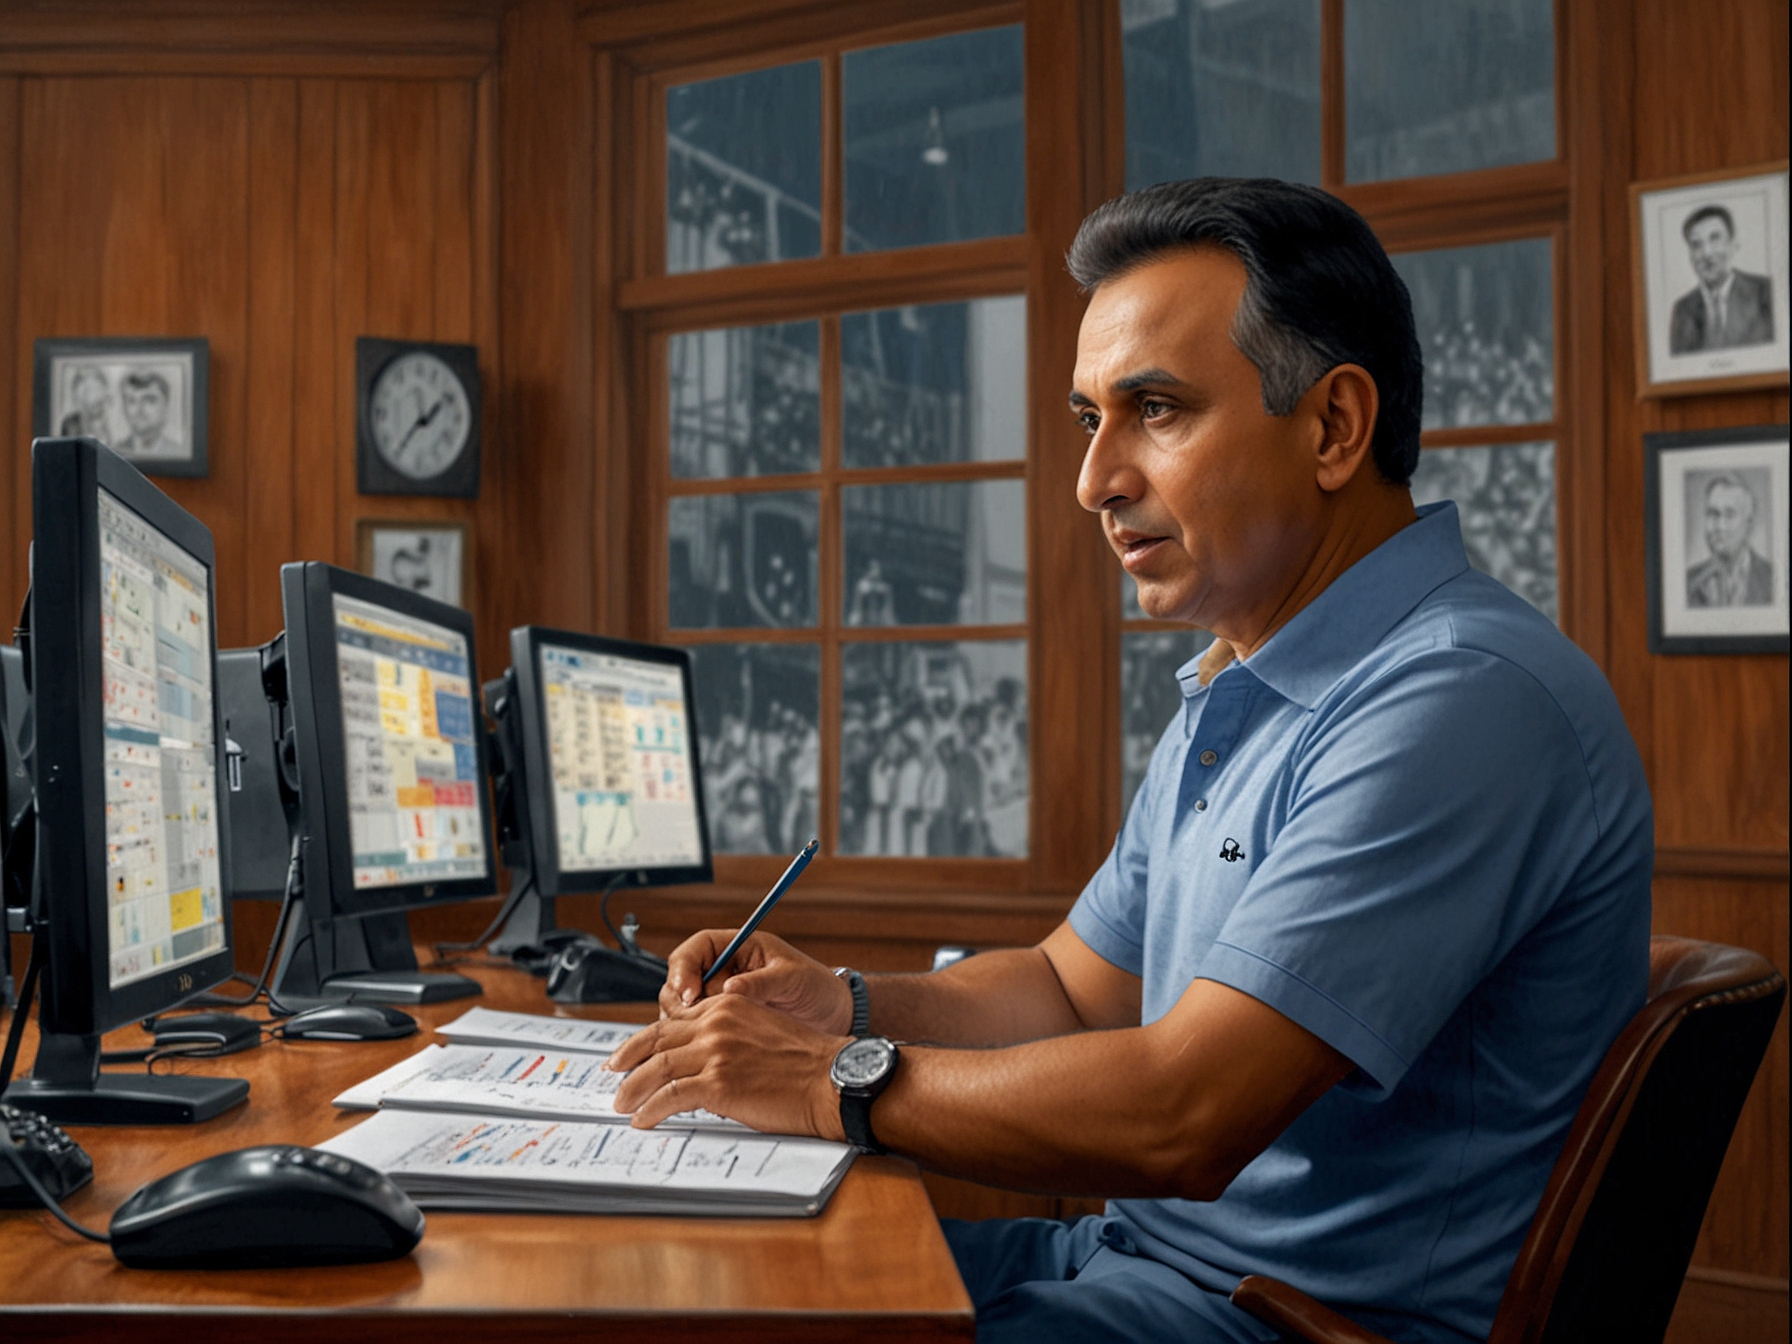 Sunil Gavaskar analyzing Rohit Sharma's batting technique in the commentary box, offering insights on overcoming the challenge posed by left-arm seamers.